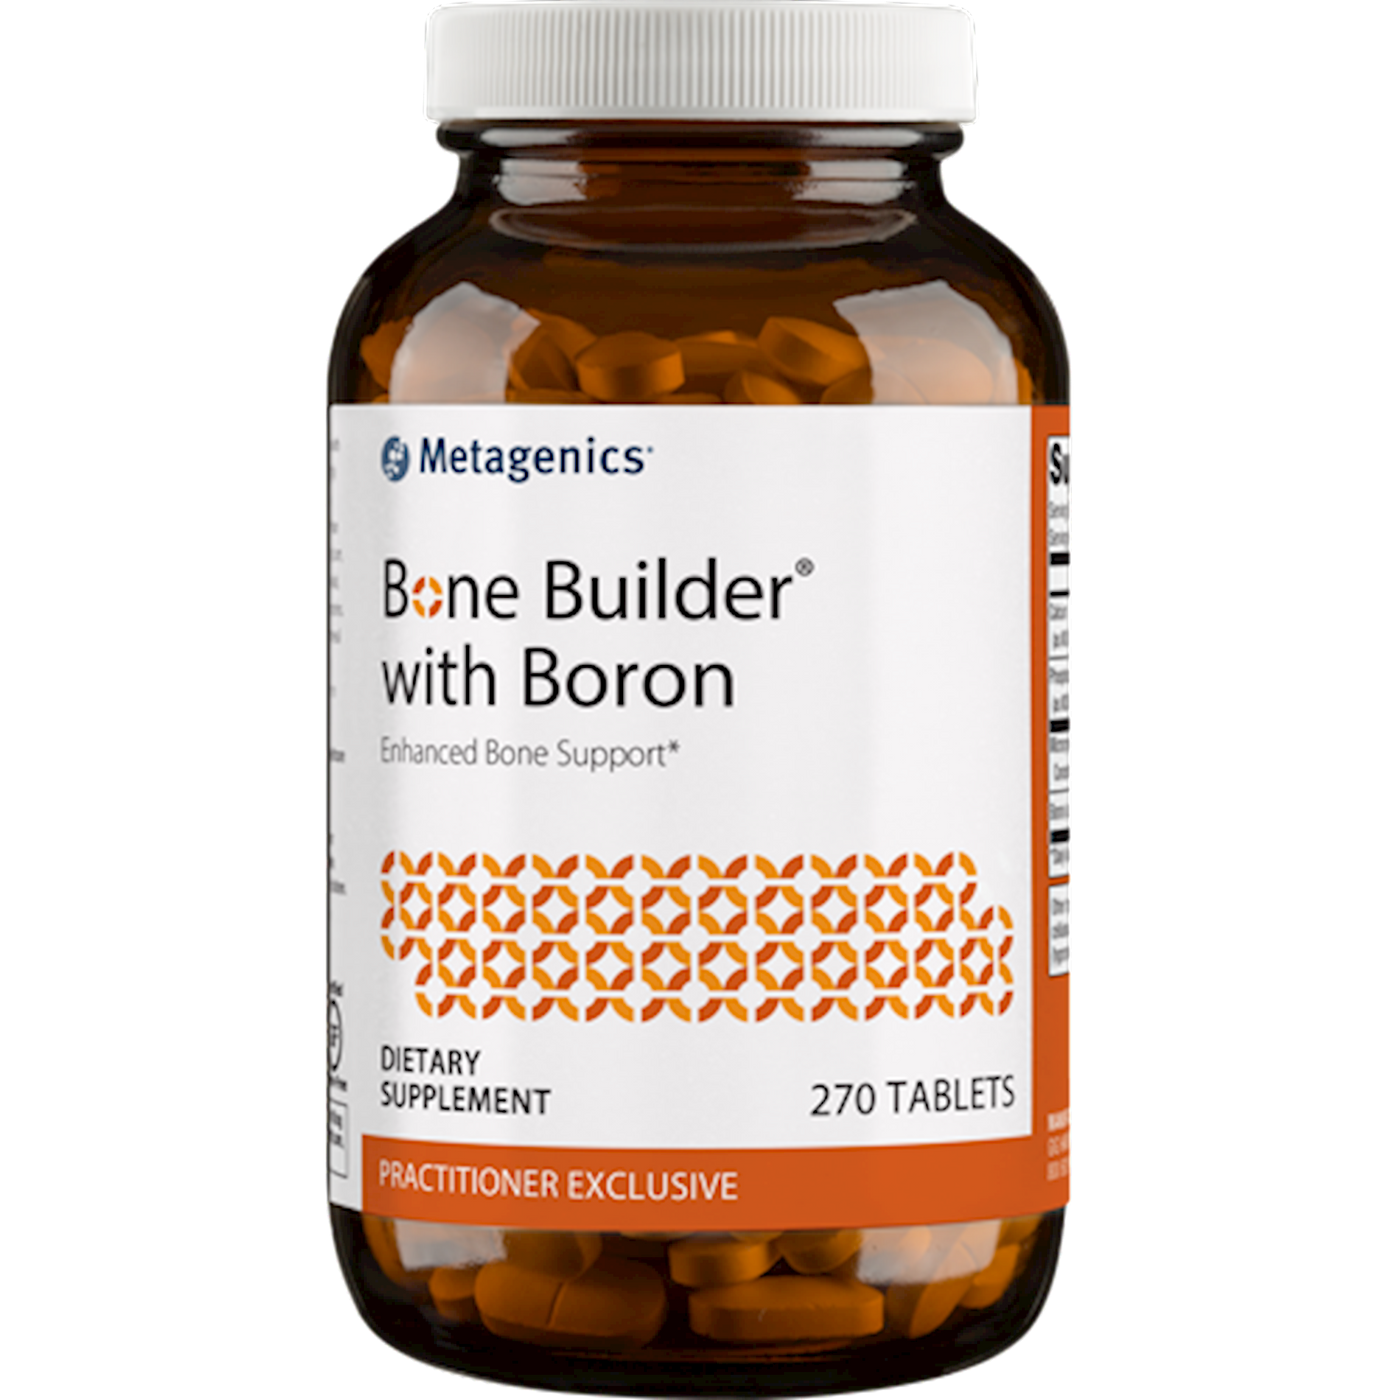 Bone Builder with Boron  Curated Wellness